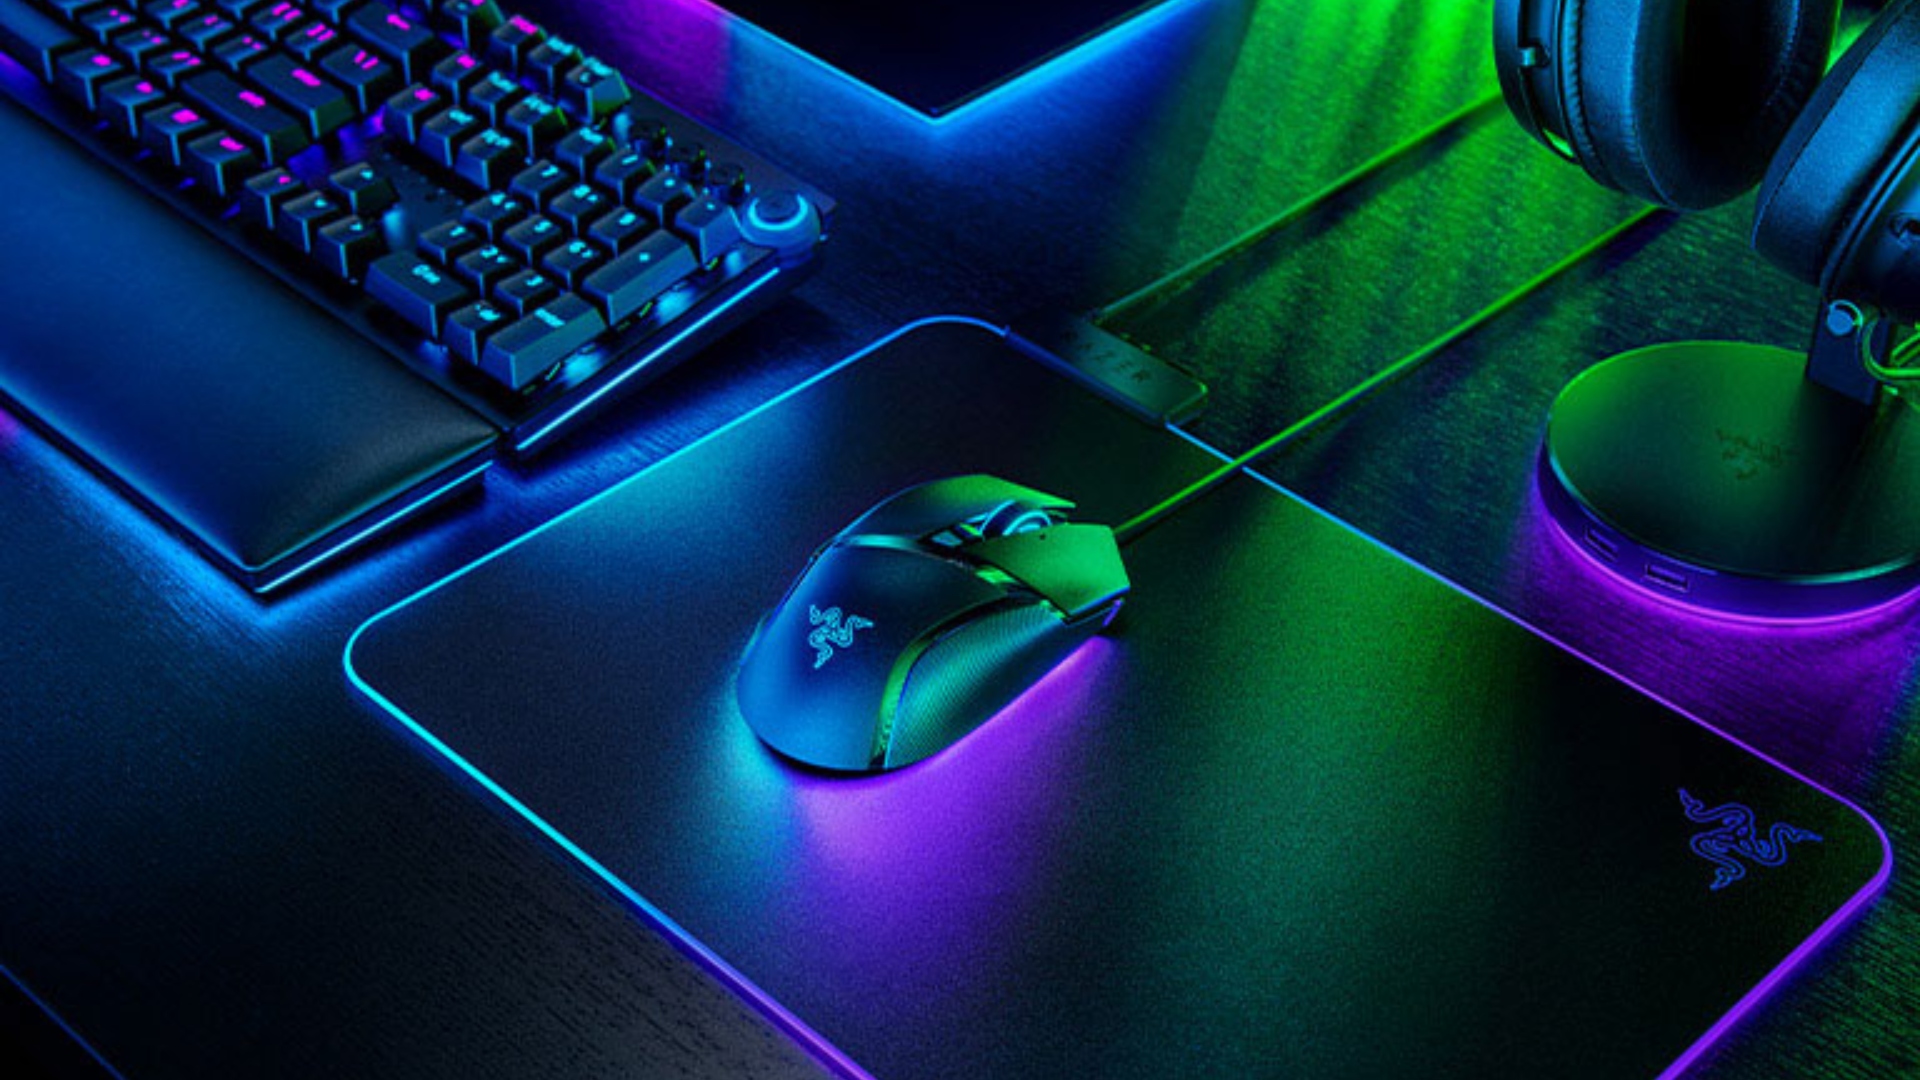 Get 35% off Razer gaming keyboards and more, plus a free gift